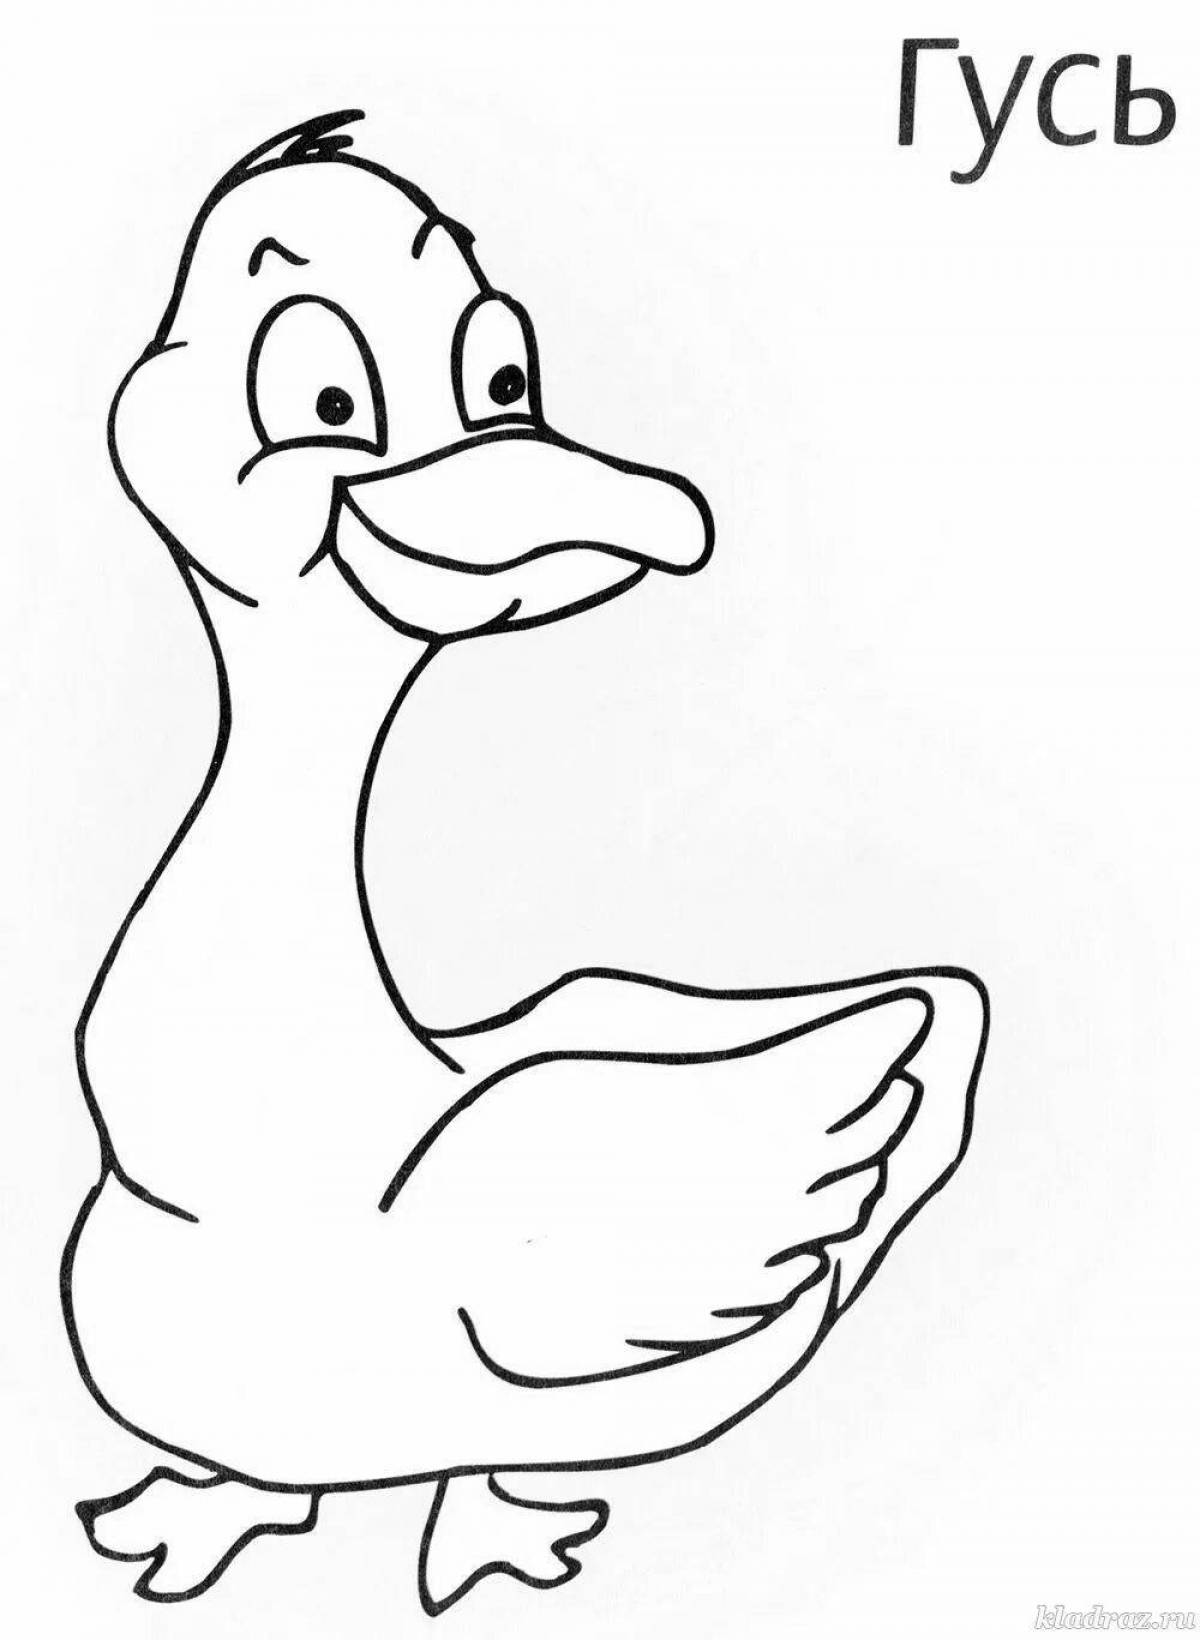 Coloring book shining geese